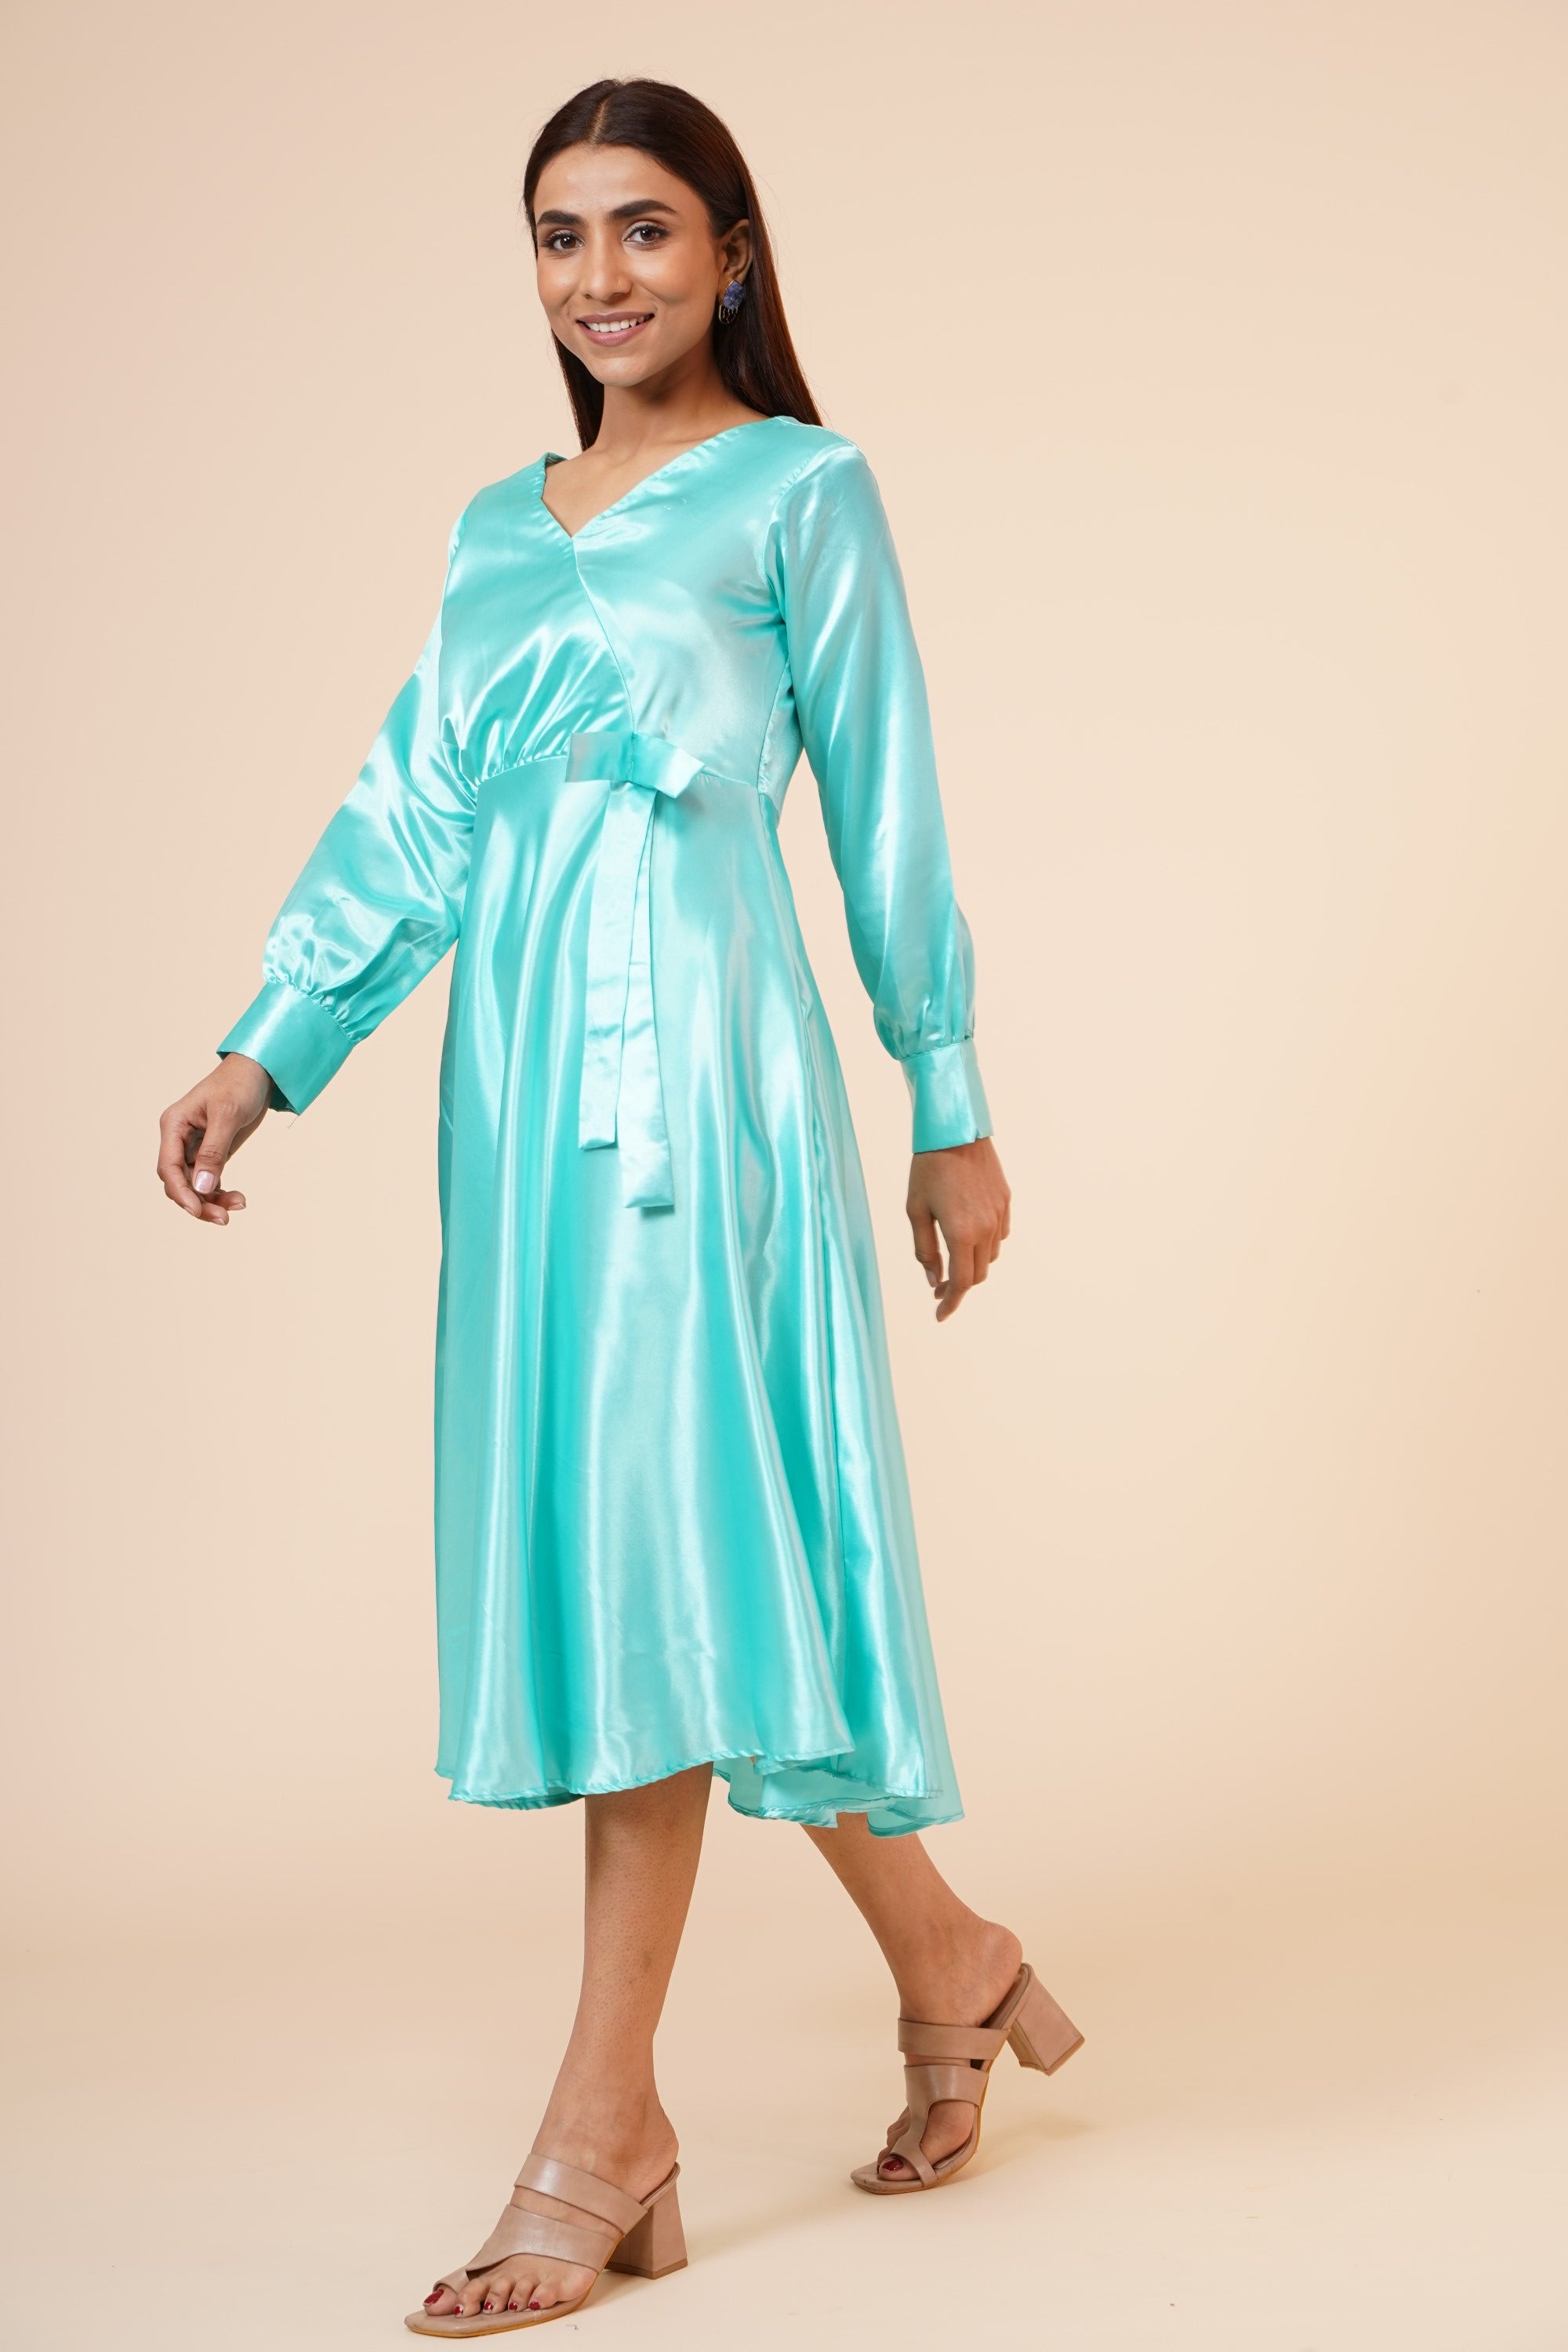 Women's Empire Line With Cuff Satin Wrap Dress Sky Blue - MIRACOLOS by Ruchi